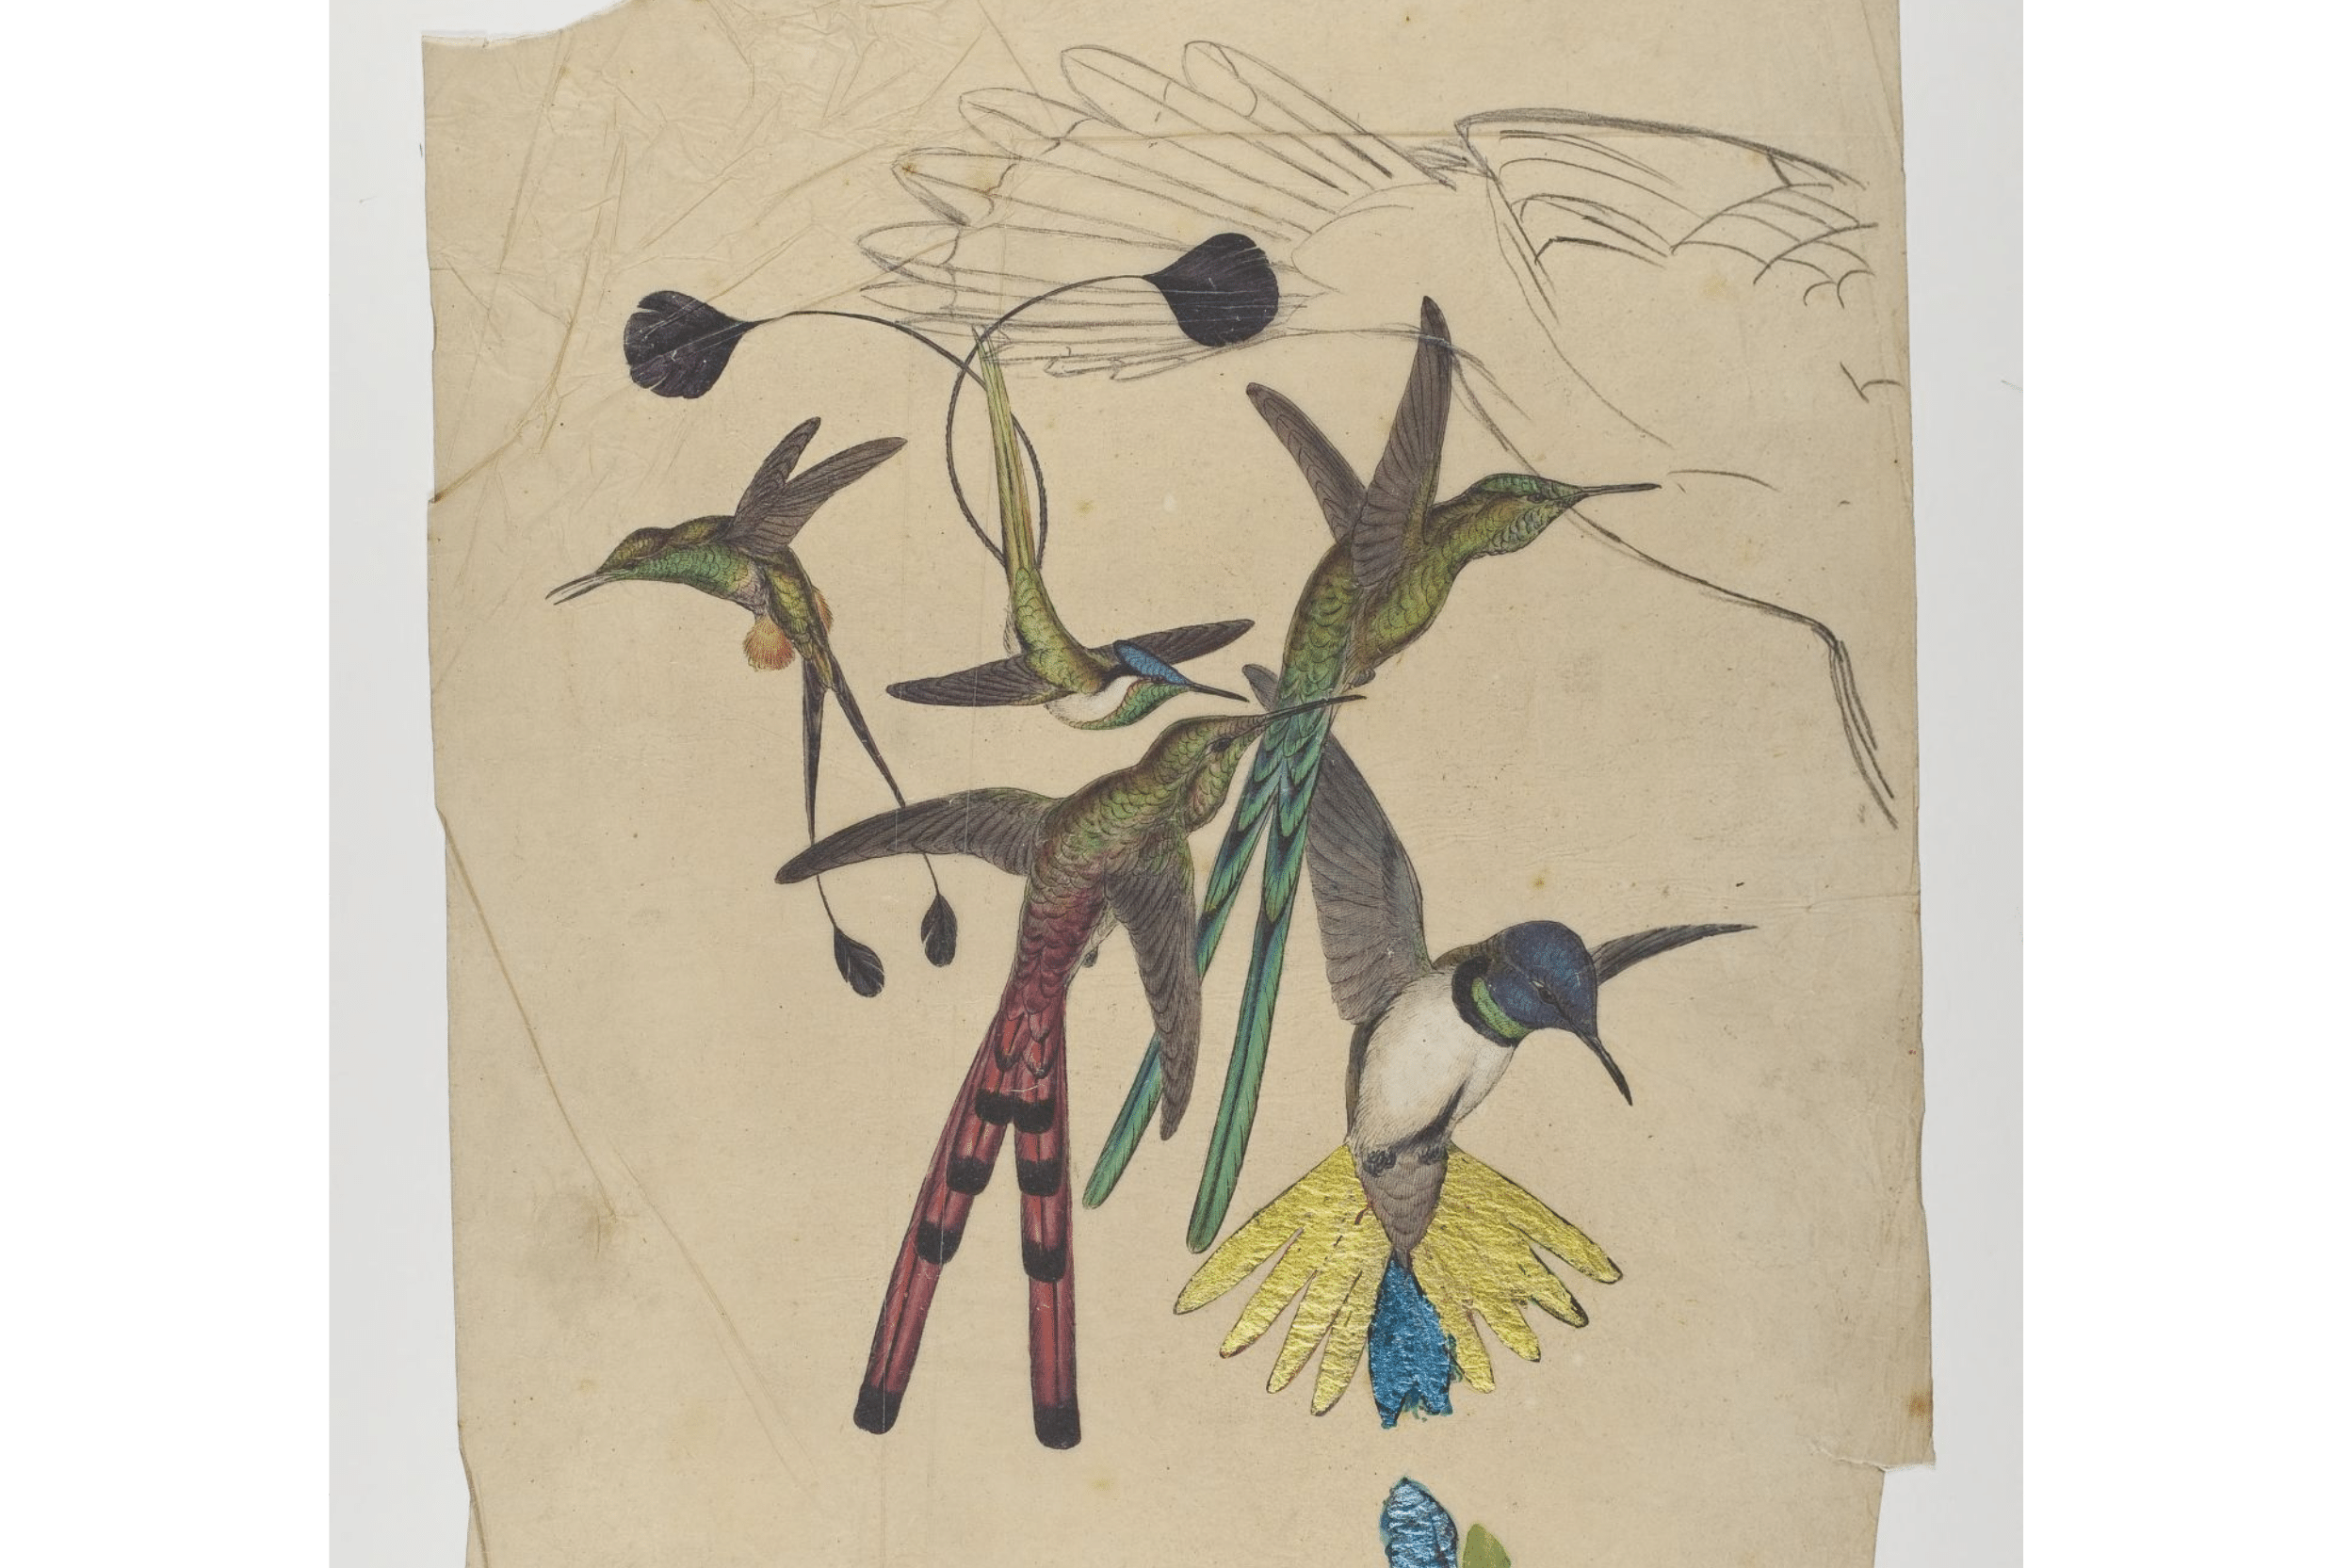 Gould experimented with gold leaf on his hummingbird prints